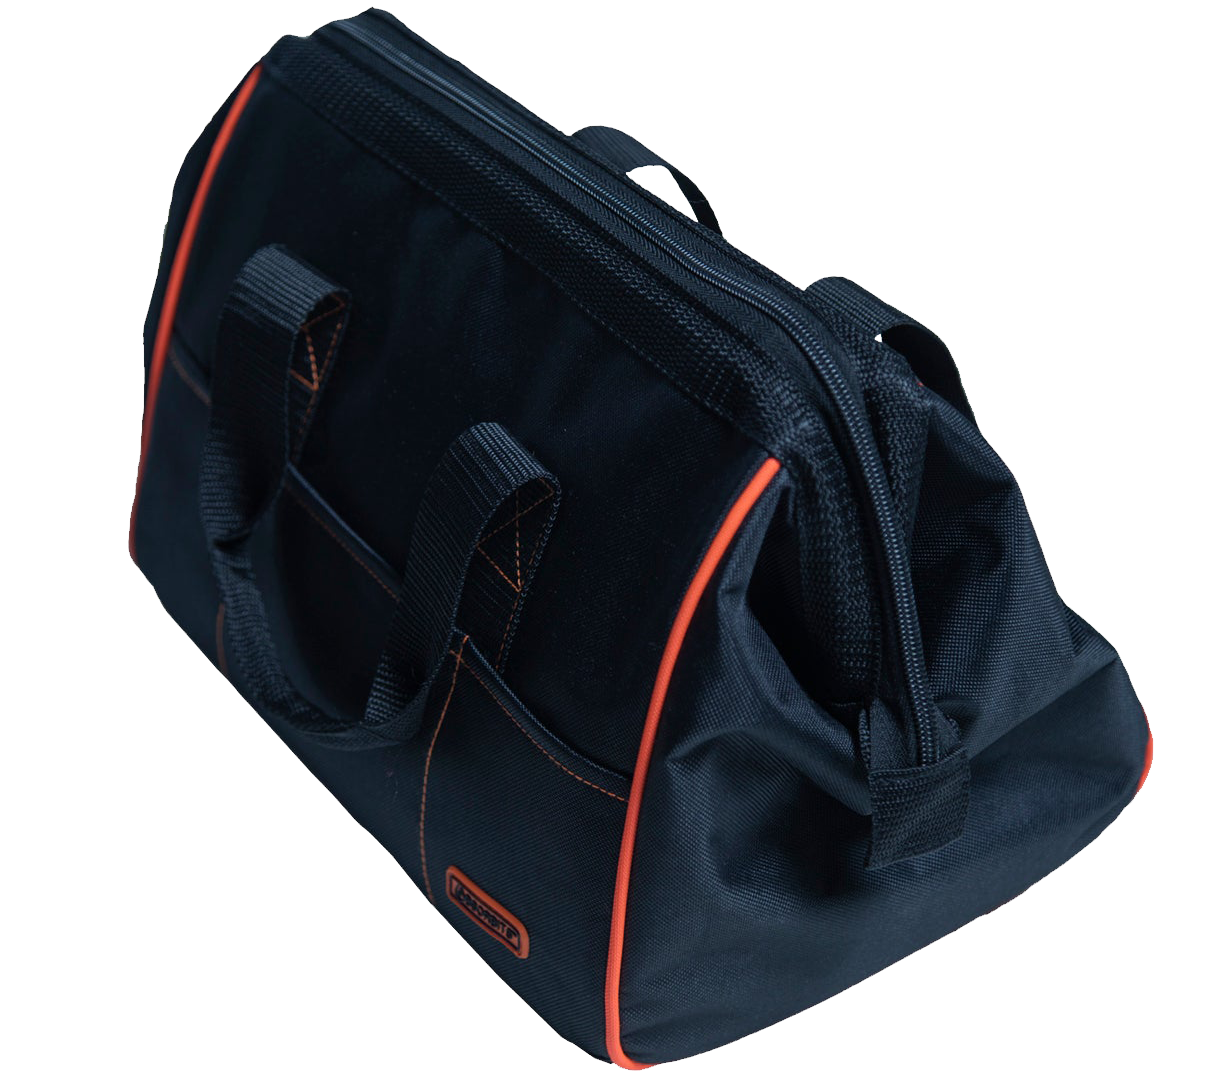 New Bone-Dri Range and Tool Bag with Absorbits Technology